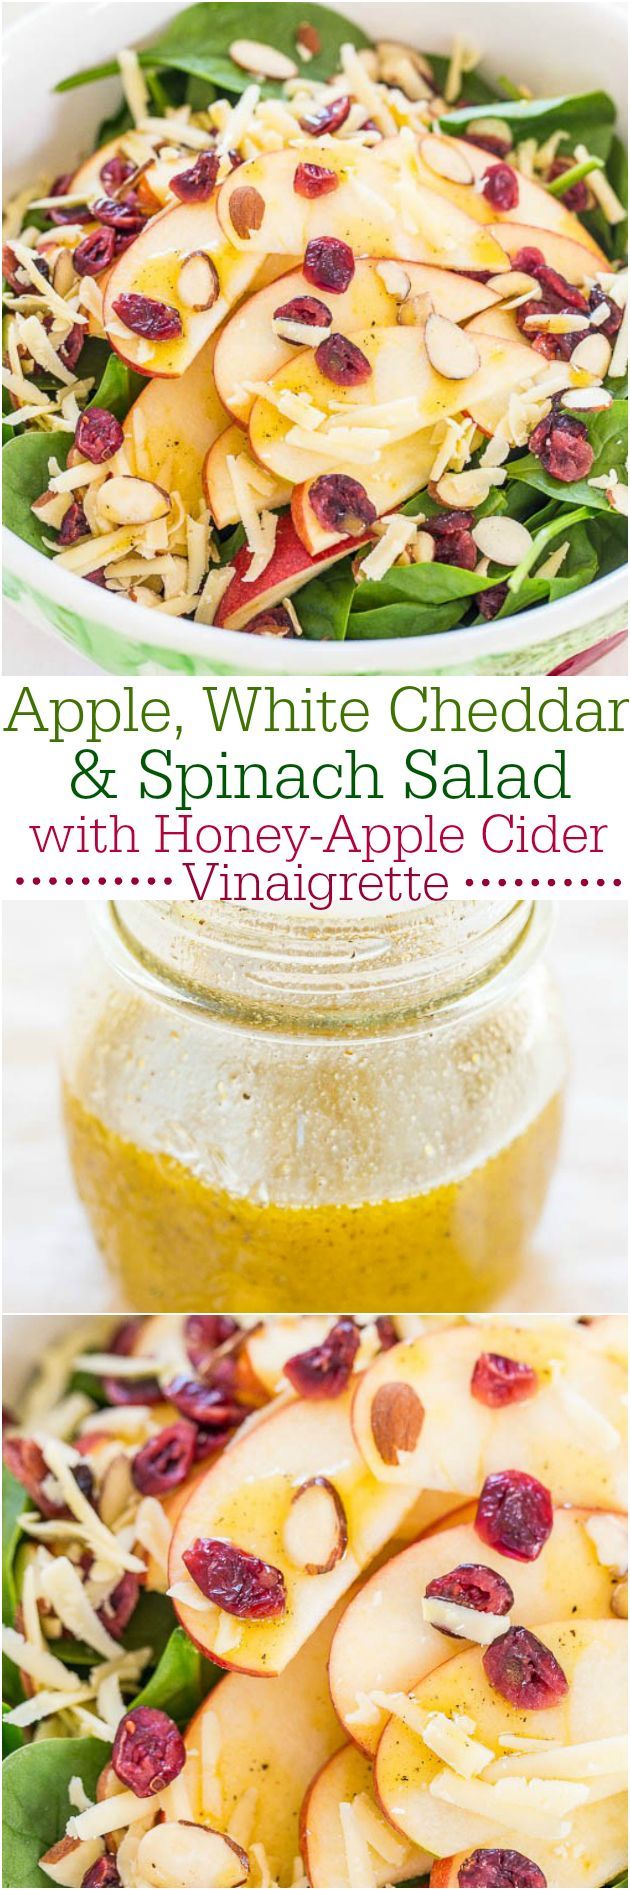 Apple, White Cheddar, and Spinach Salad with Honey-Apple Cider Vinaigrette – The flavors just POP in this